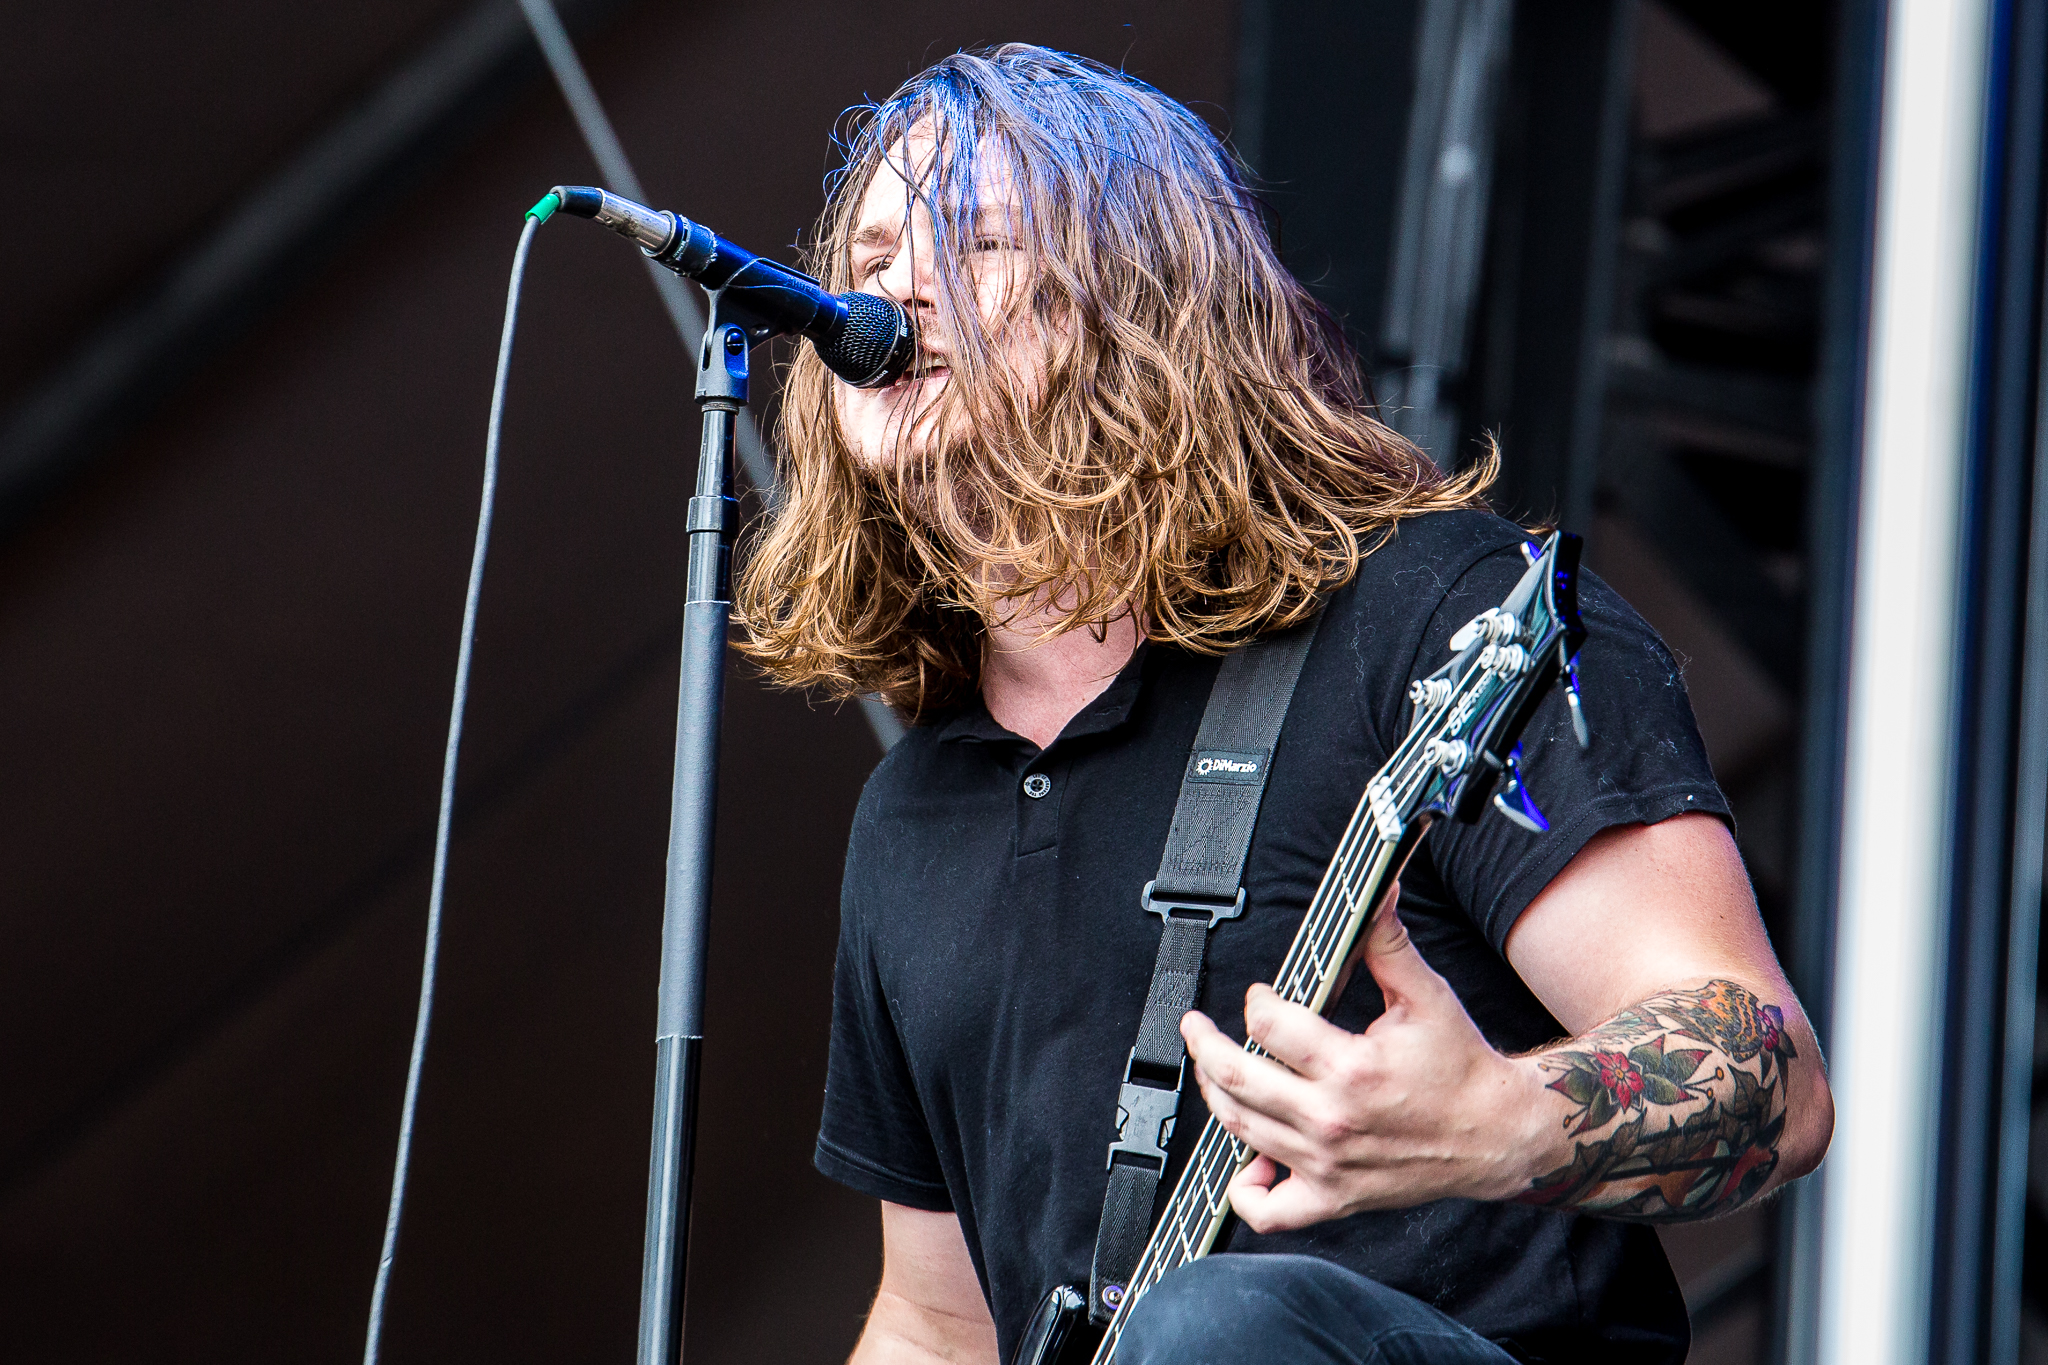 Of Mice & Men Frontman Aaron Pauley Recovering From Surgery